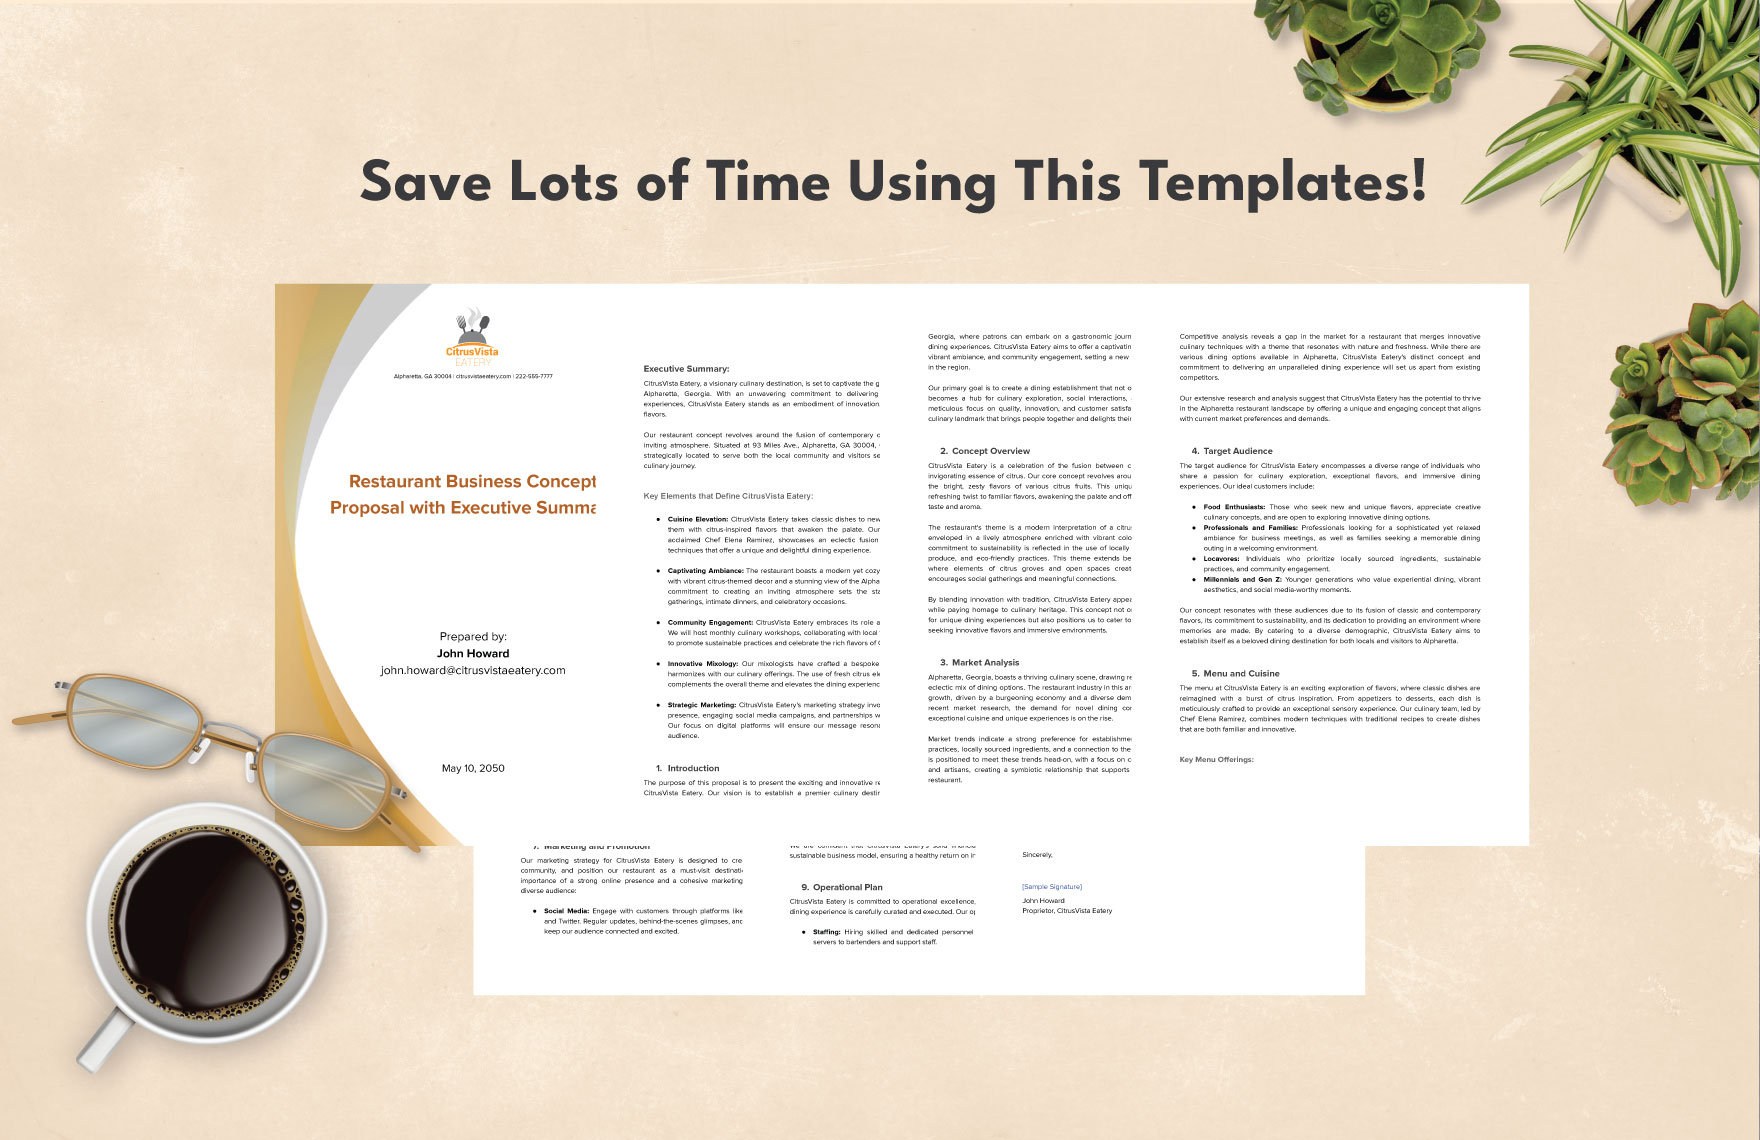 Restaurant Business Concept Proposal with Executive Summary Template